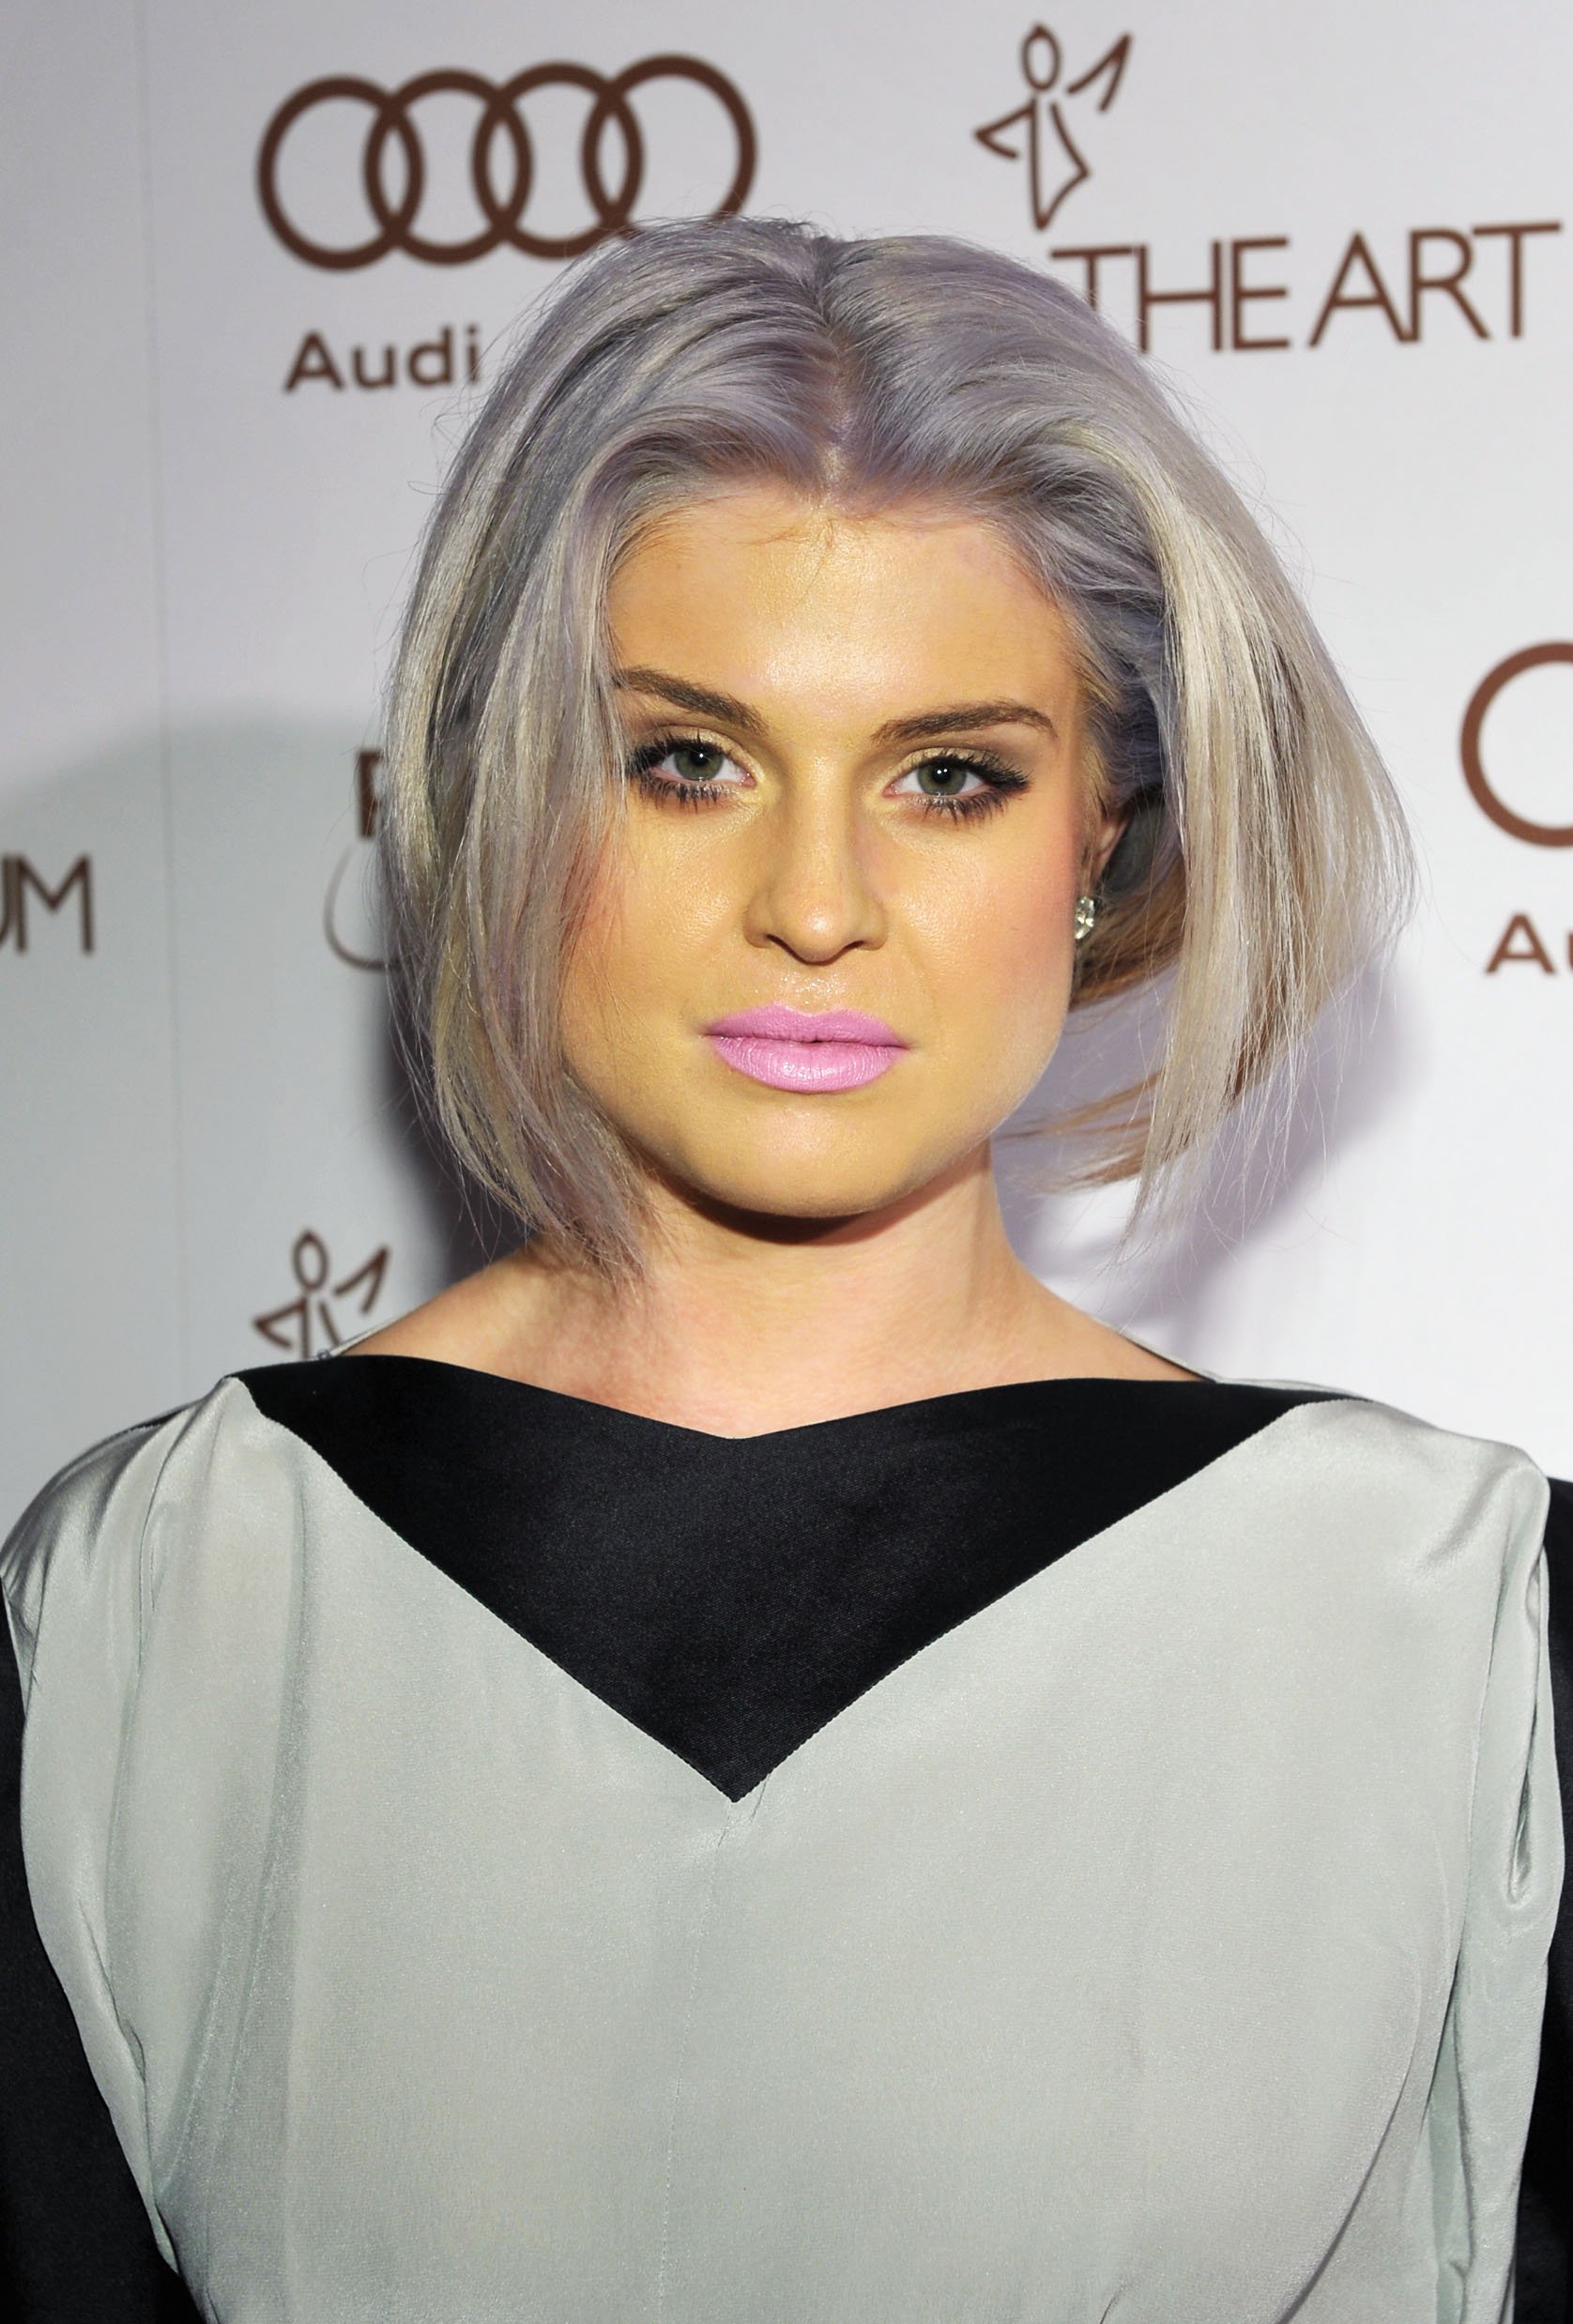 Kelly Osbourne on January 14, 2012 in Los Angeles, California | Source: Getty Images 